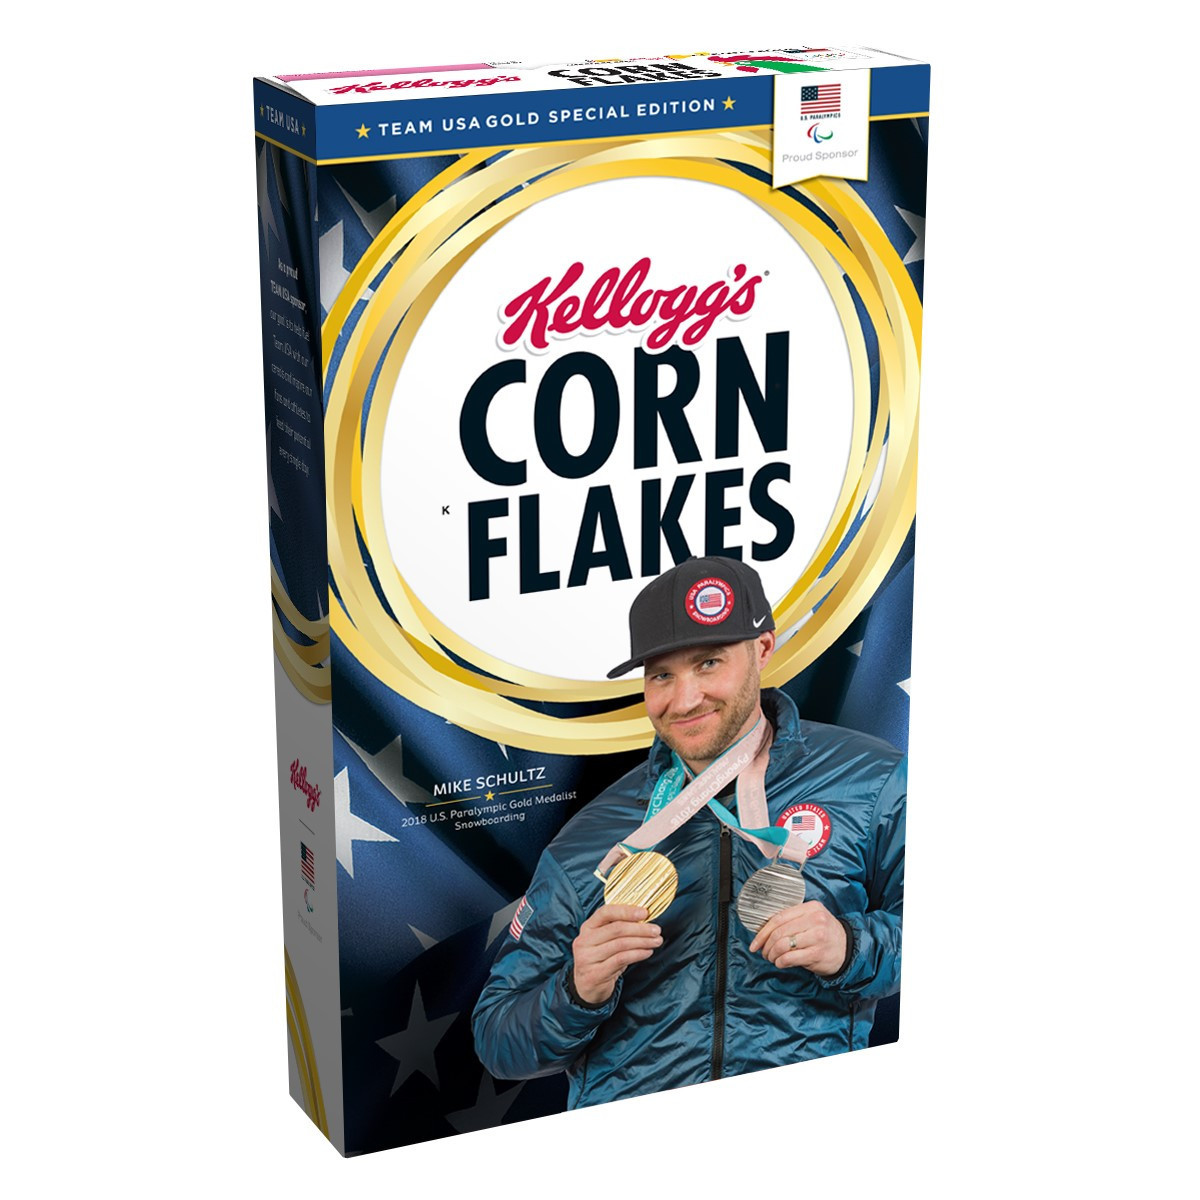 Pyeongchang 2018 champion Schultz to become first US Paralympian to feature on gold medal edition box of Kellogg's Corn Flakes